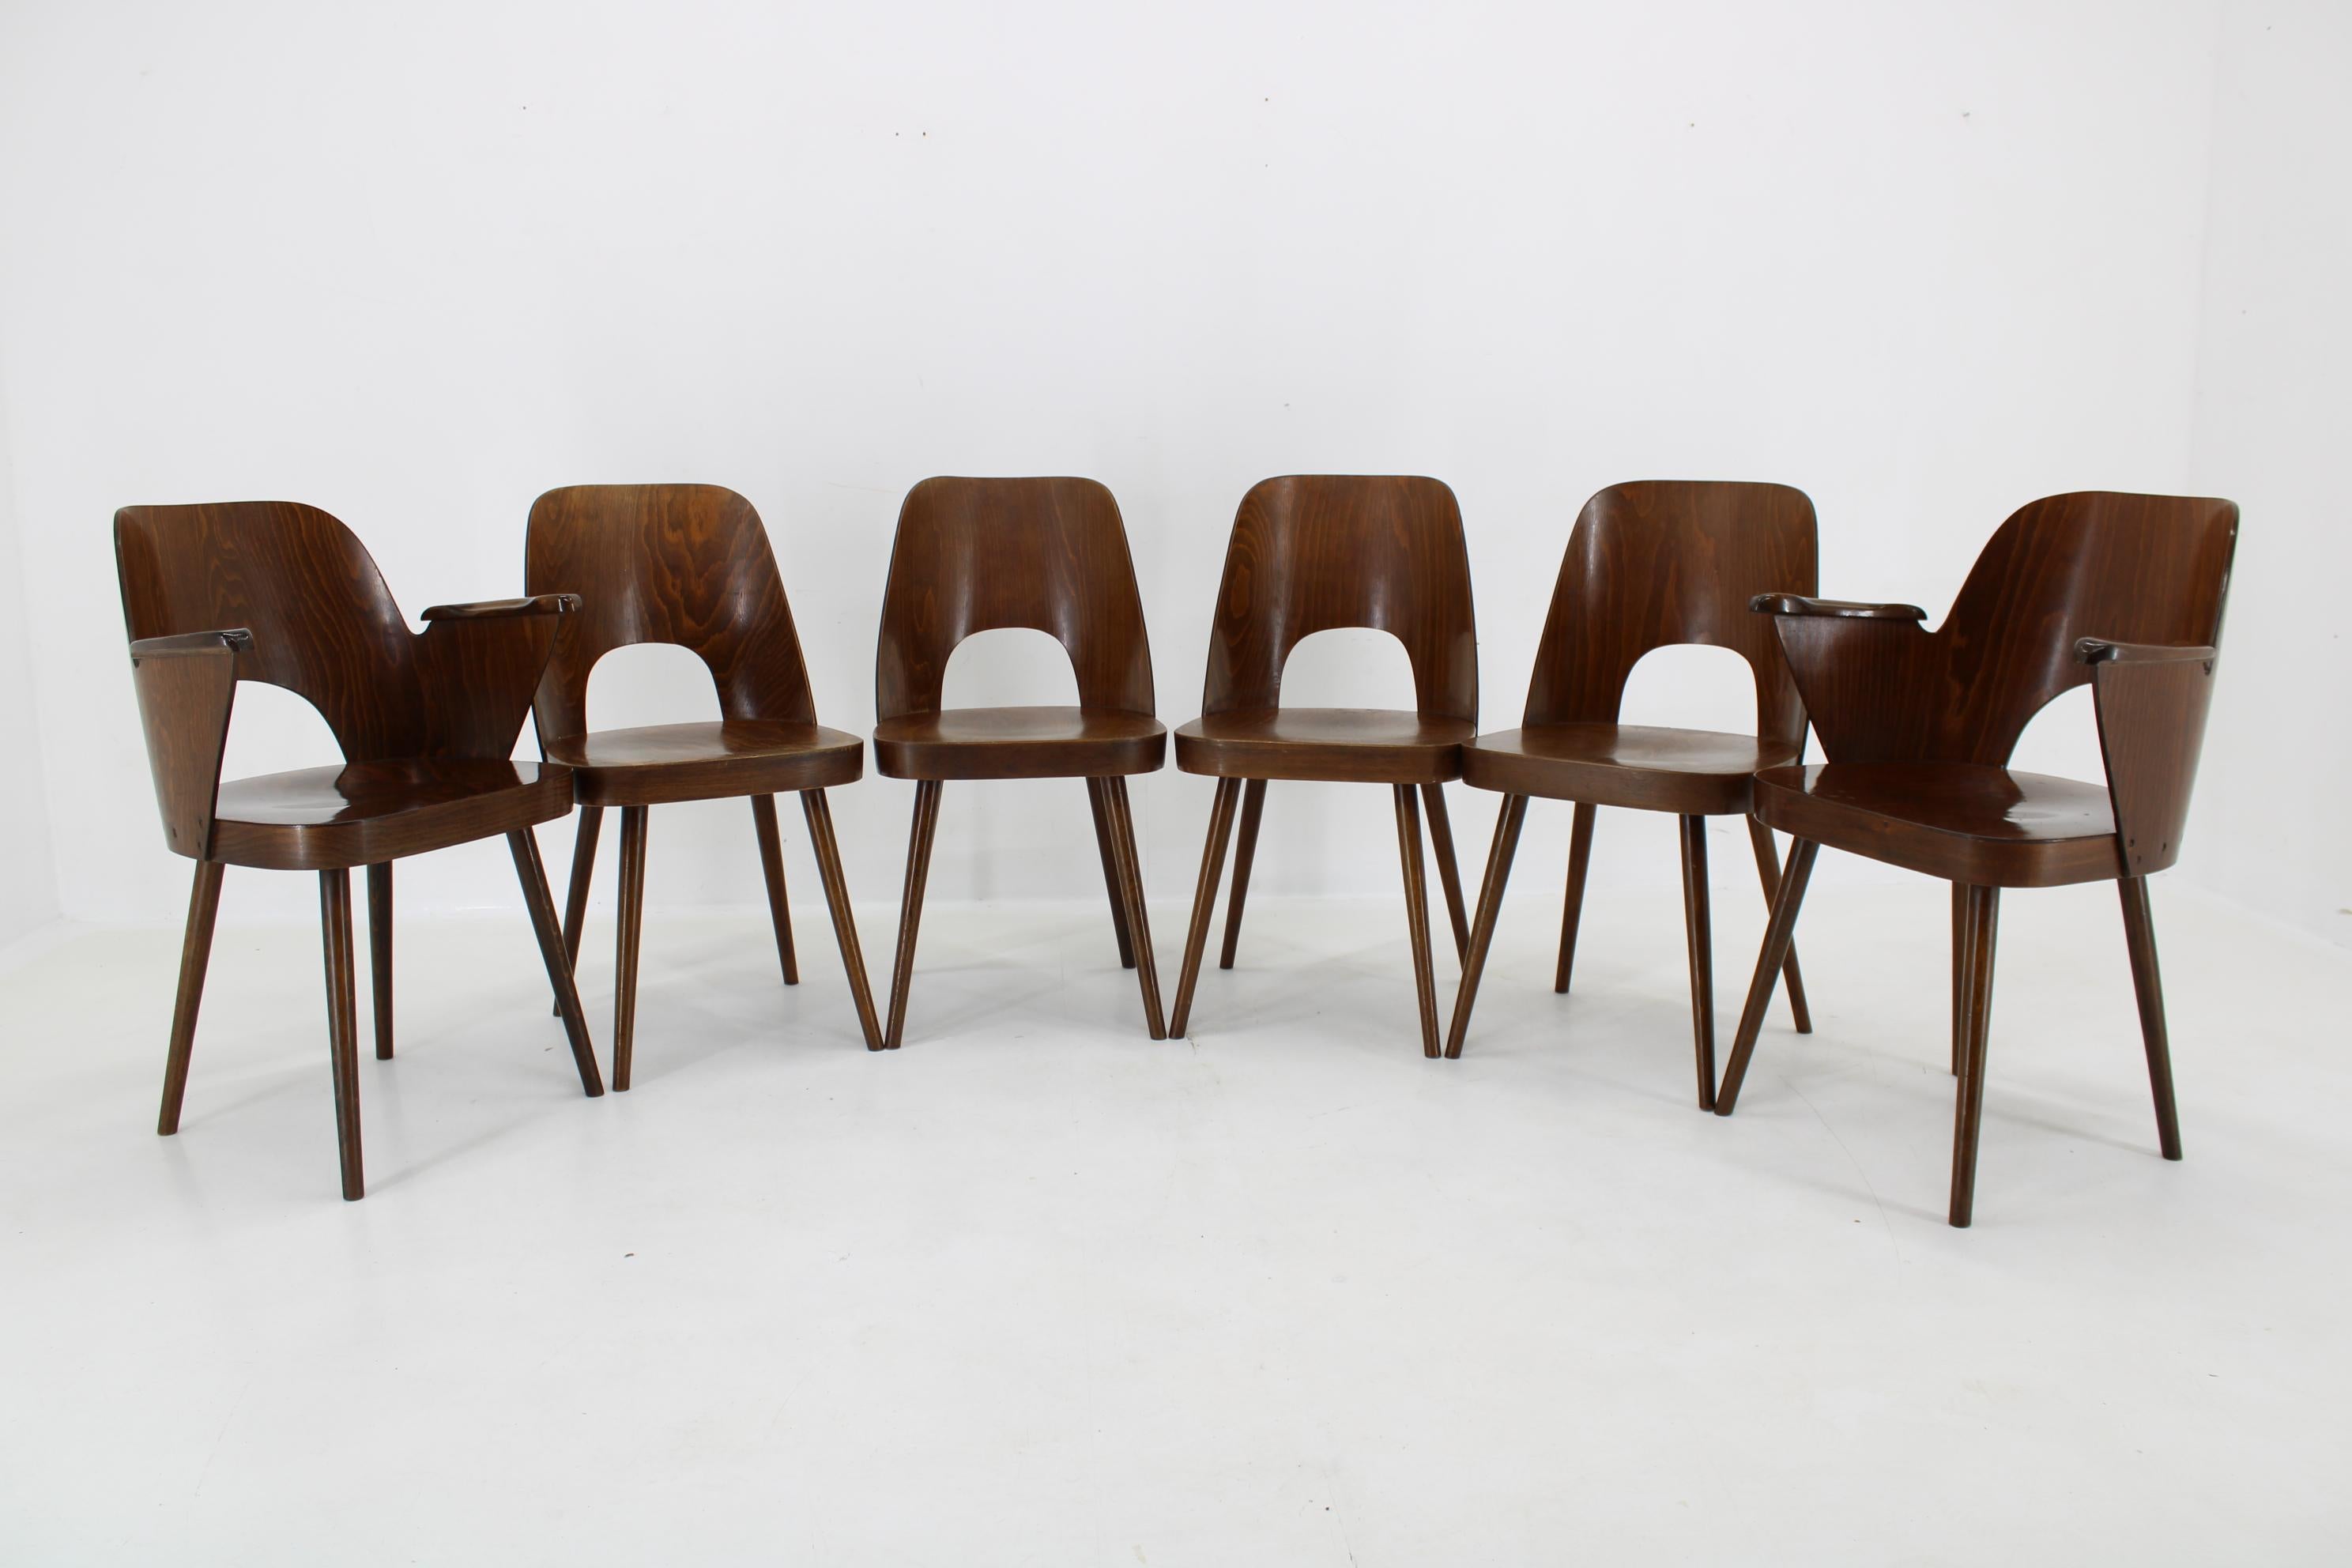 - Made of stained beech wood and beech plywood 
- The wooden parts have been repolished
- Armrests 64 cm
- dimensions of chairs without armrests:  82x(47)x44x55cm